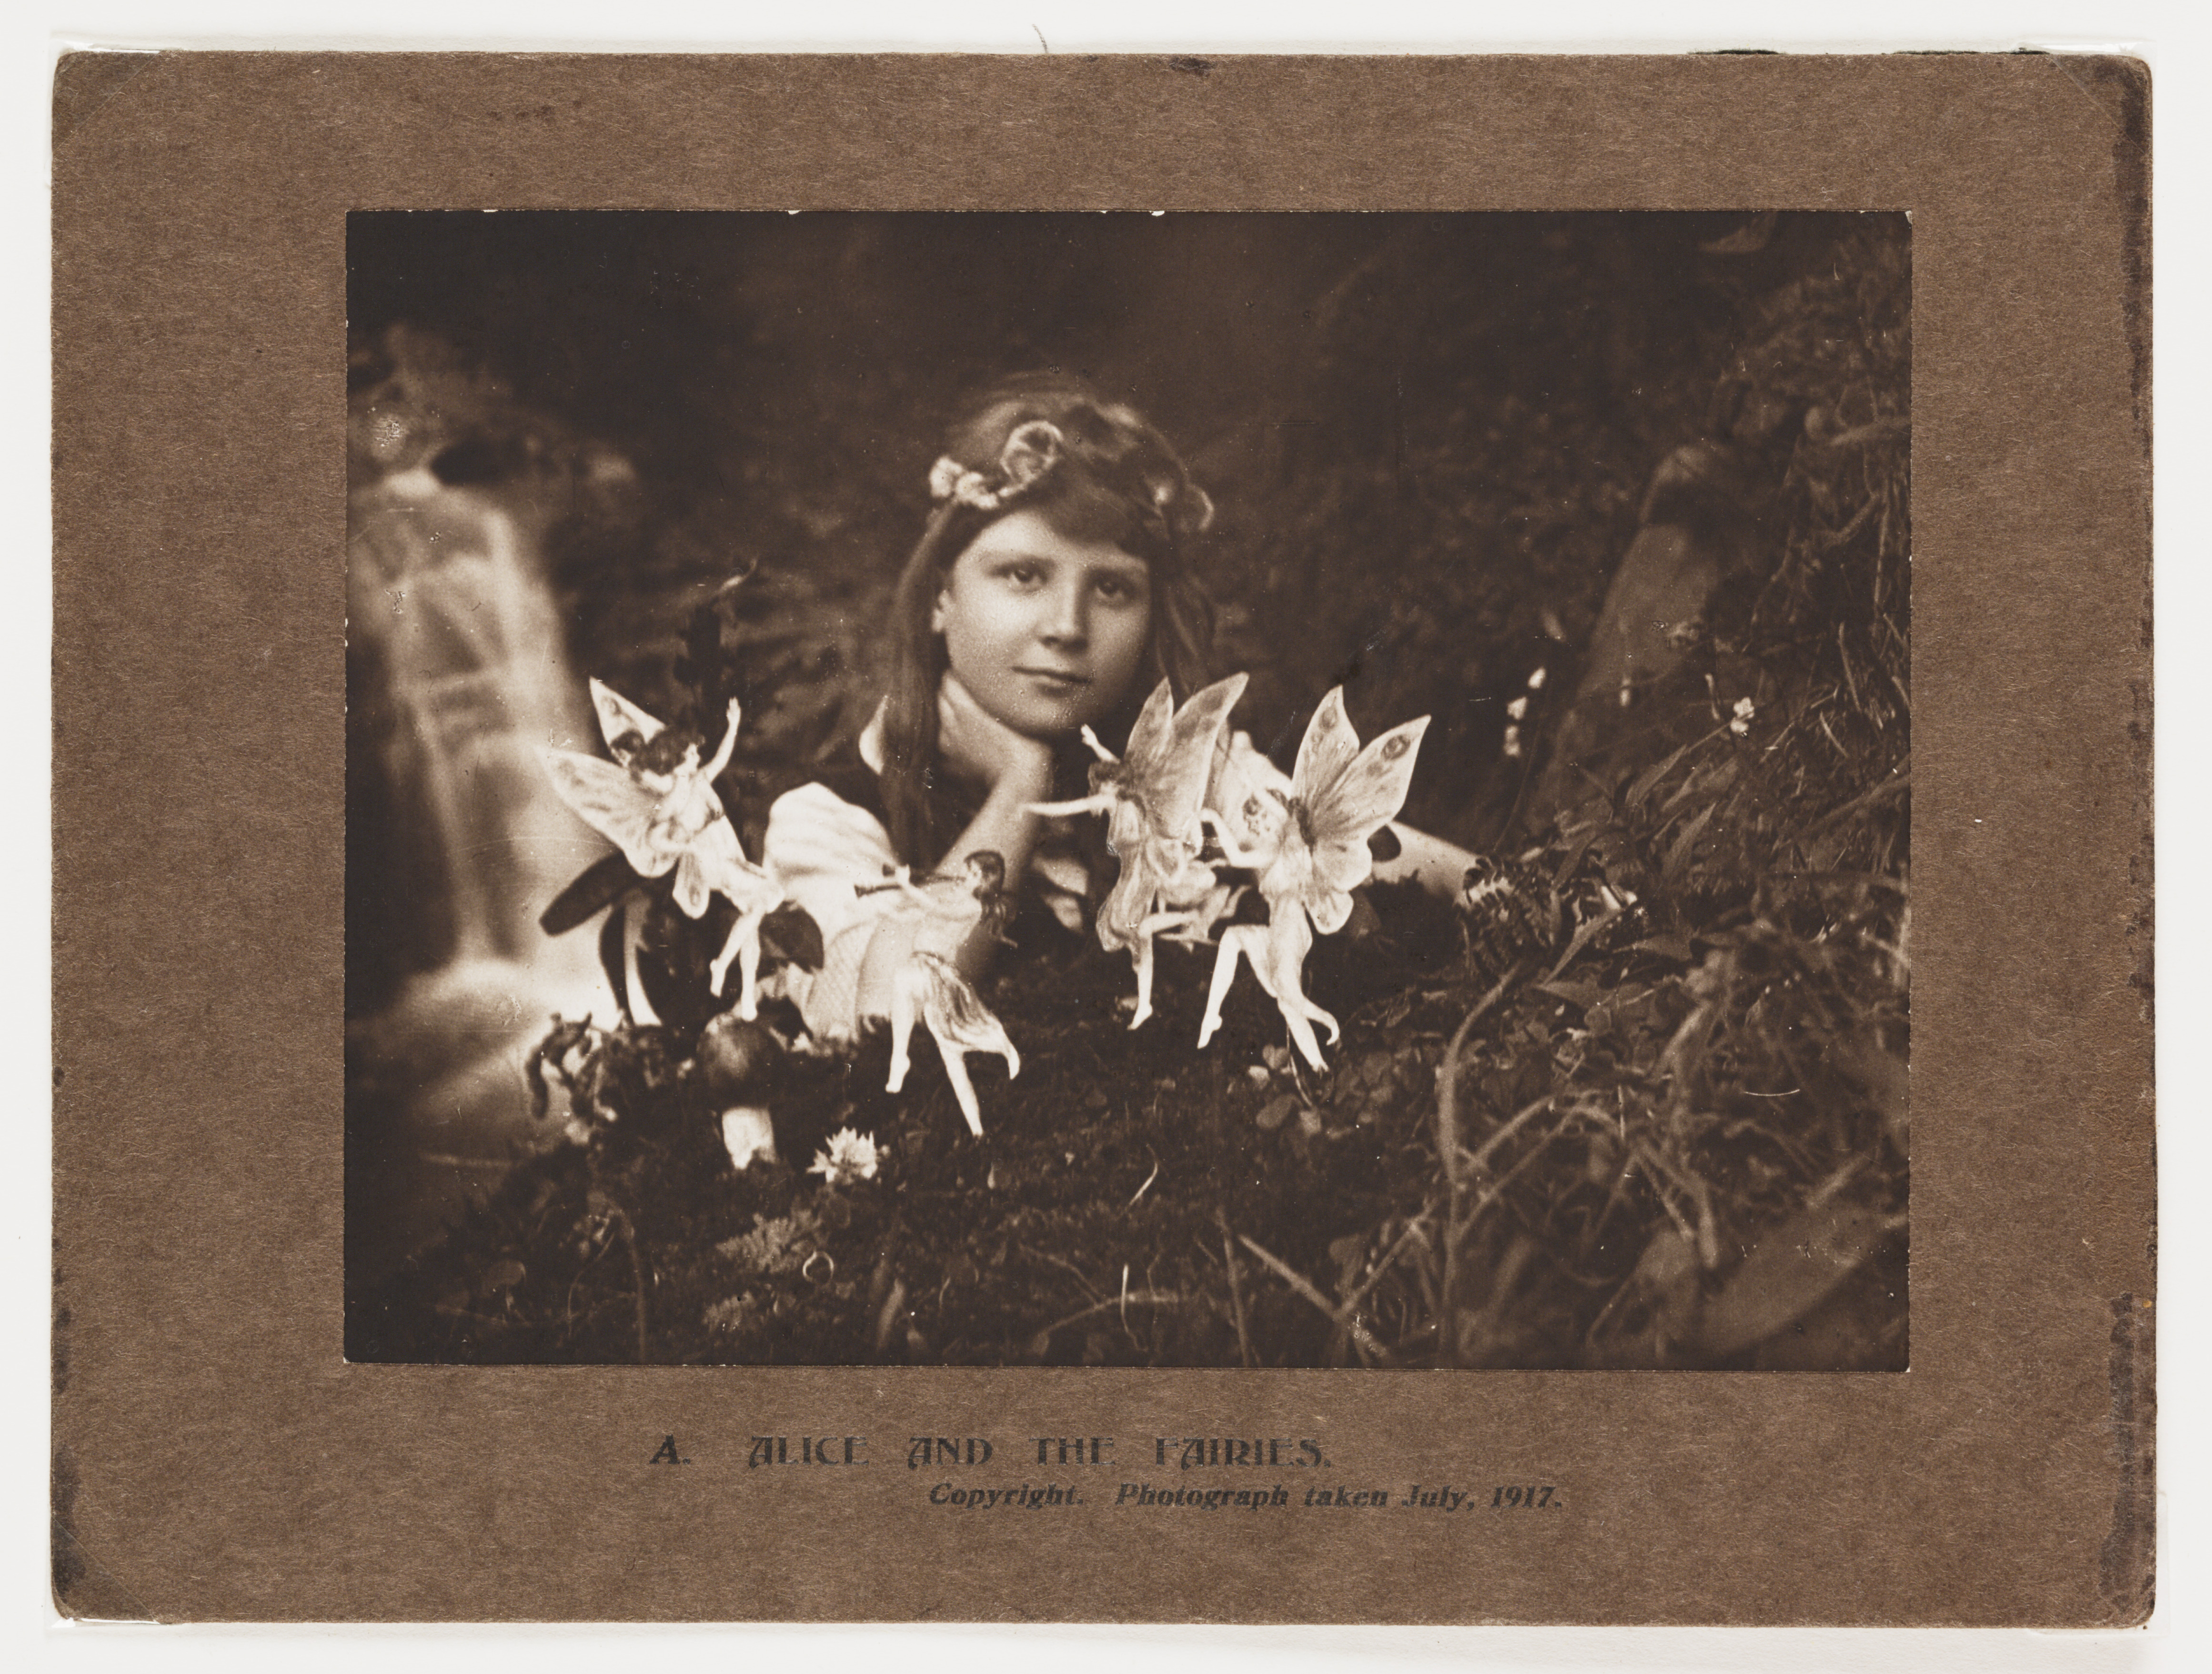 An image showing a girl with fairies  